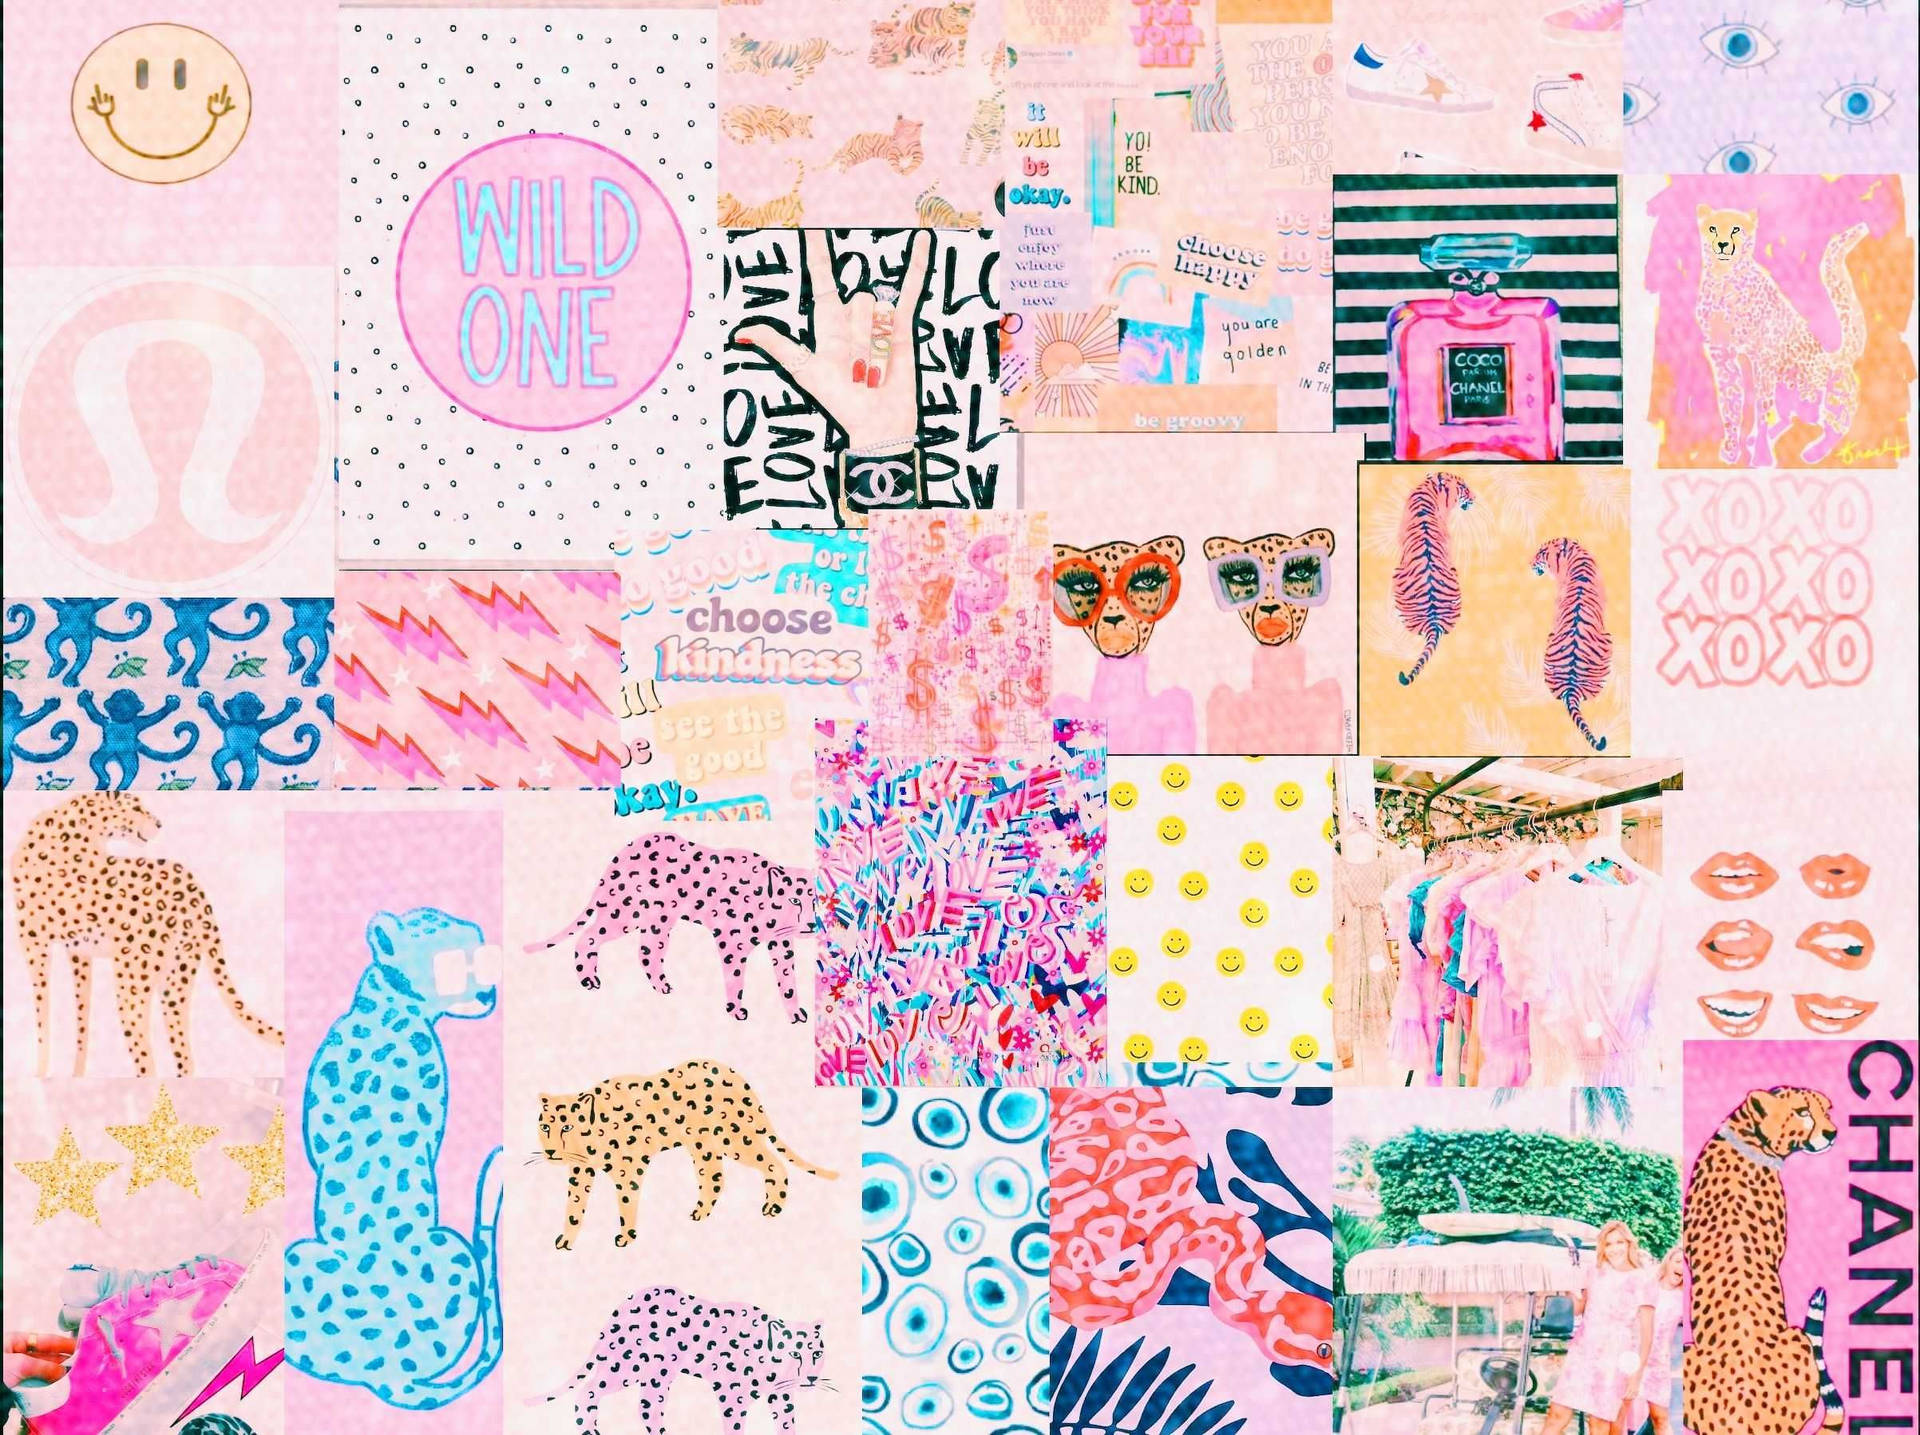 Here are some cute wallpapers  Preppy wallpaper Preppy aesthetic  wallpaper Iphone wallpaper preppy